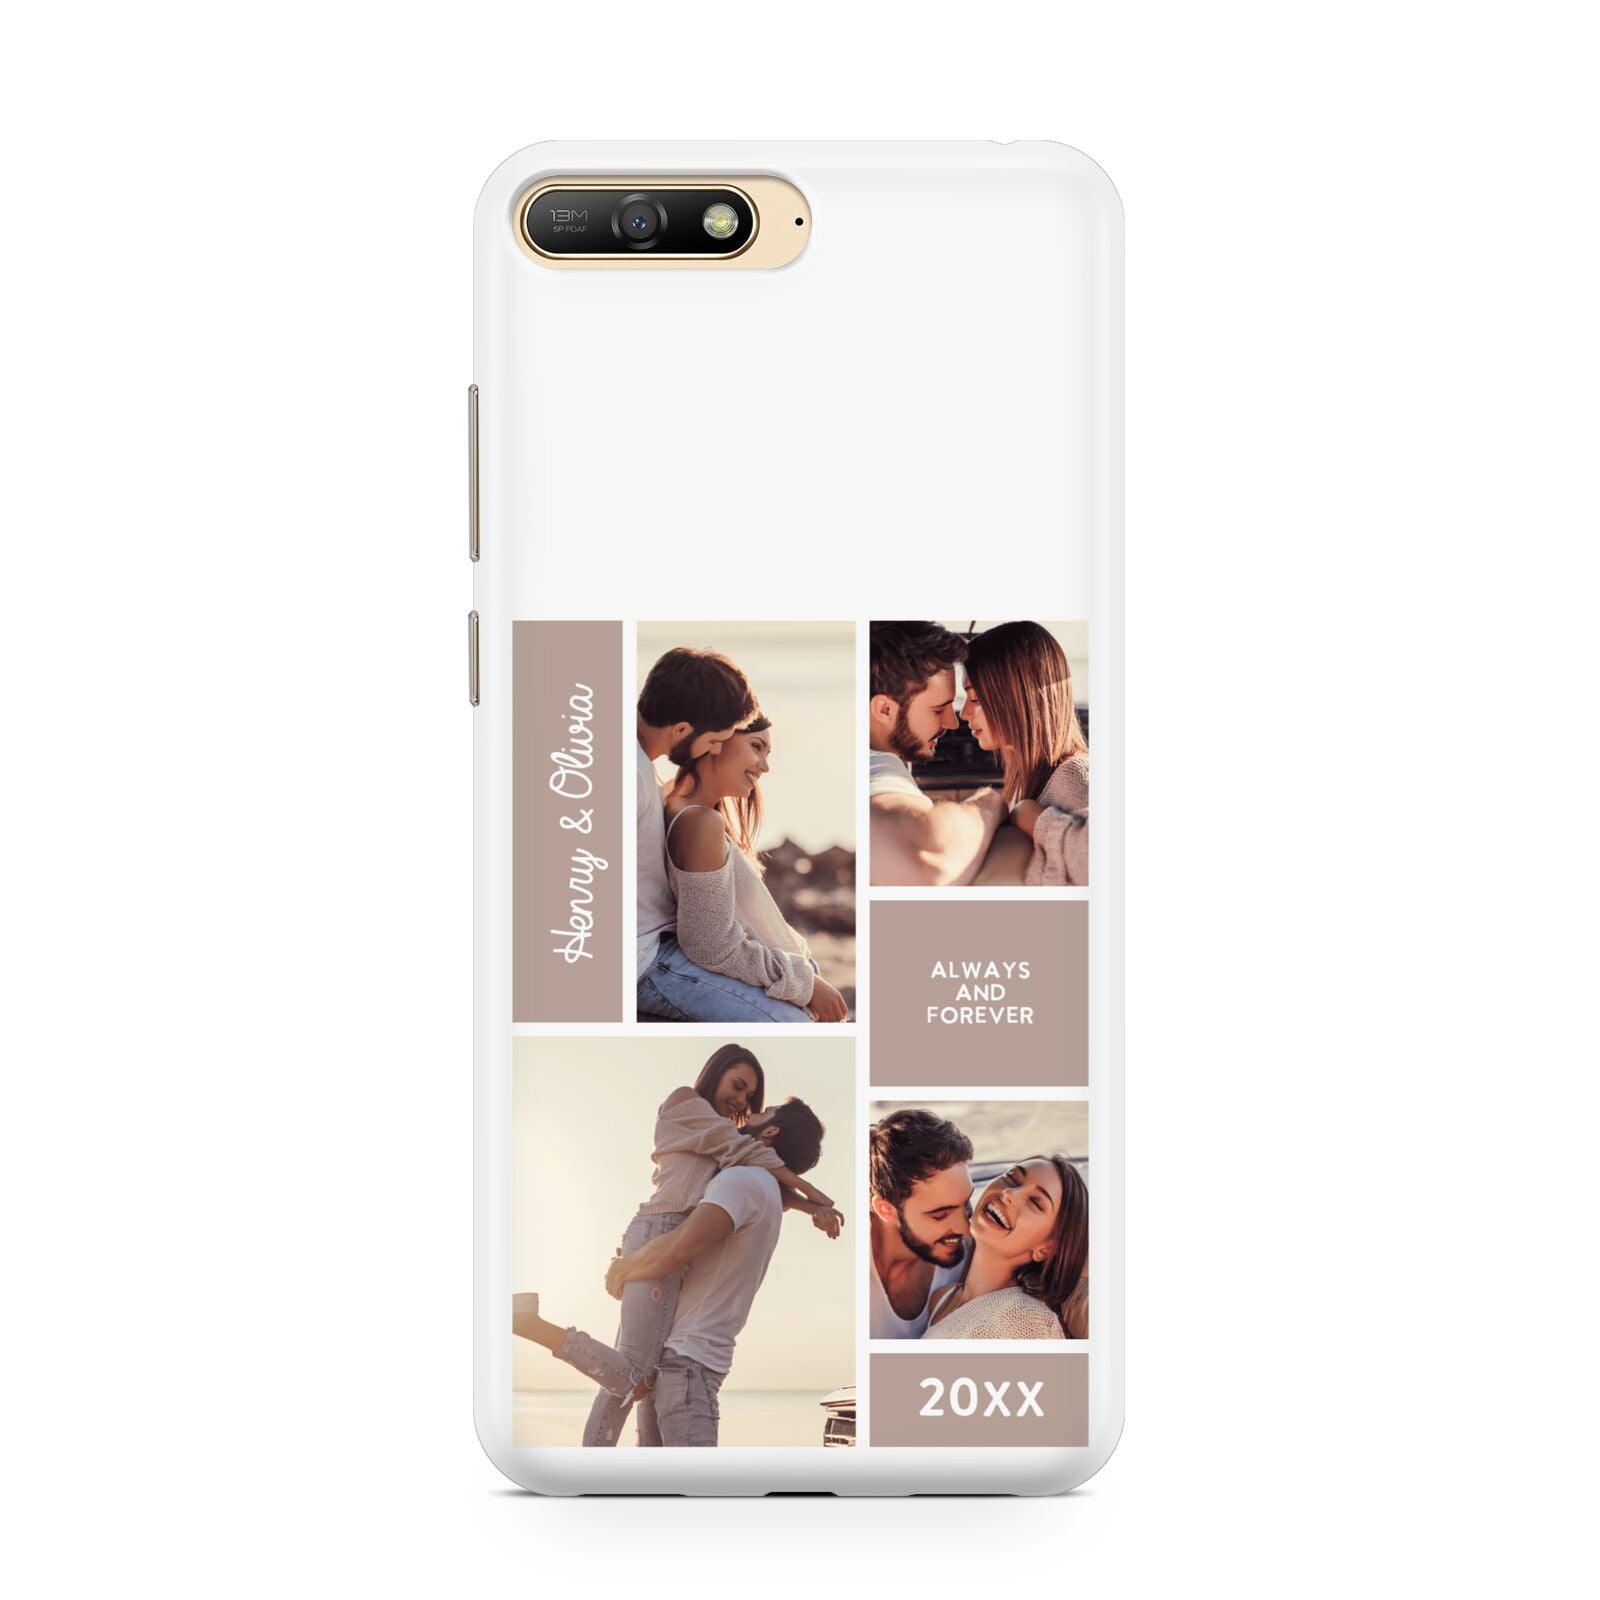 Couples Valentine Photo Collage Personalised Huawei Y6 2018